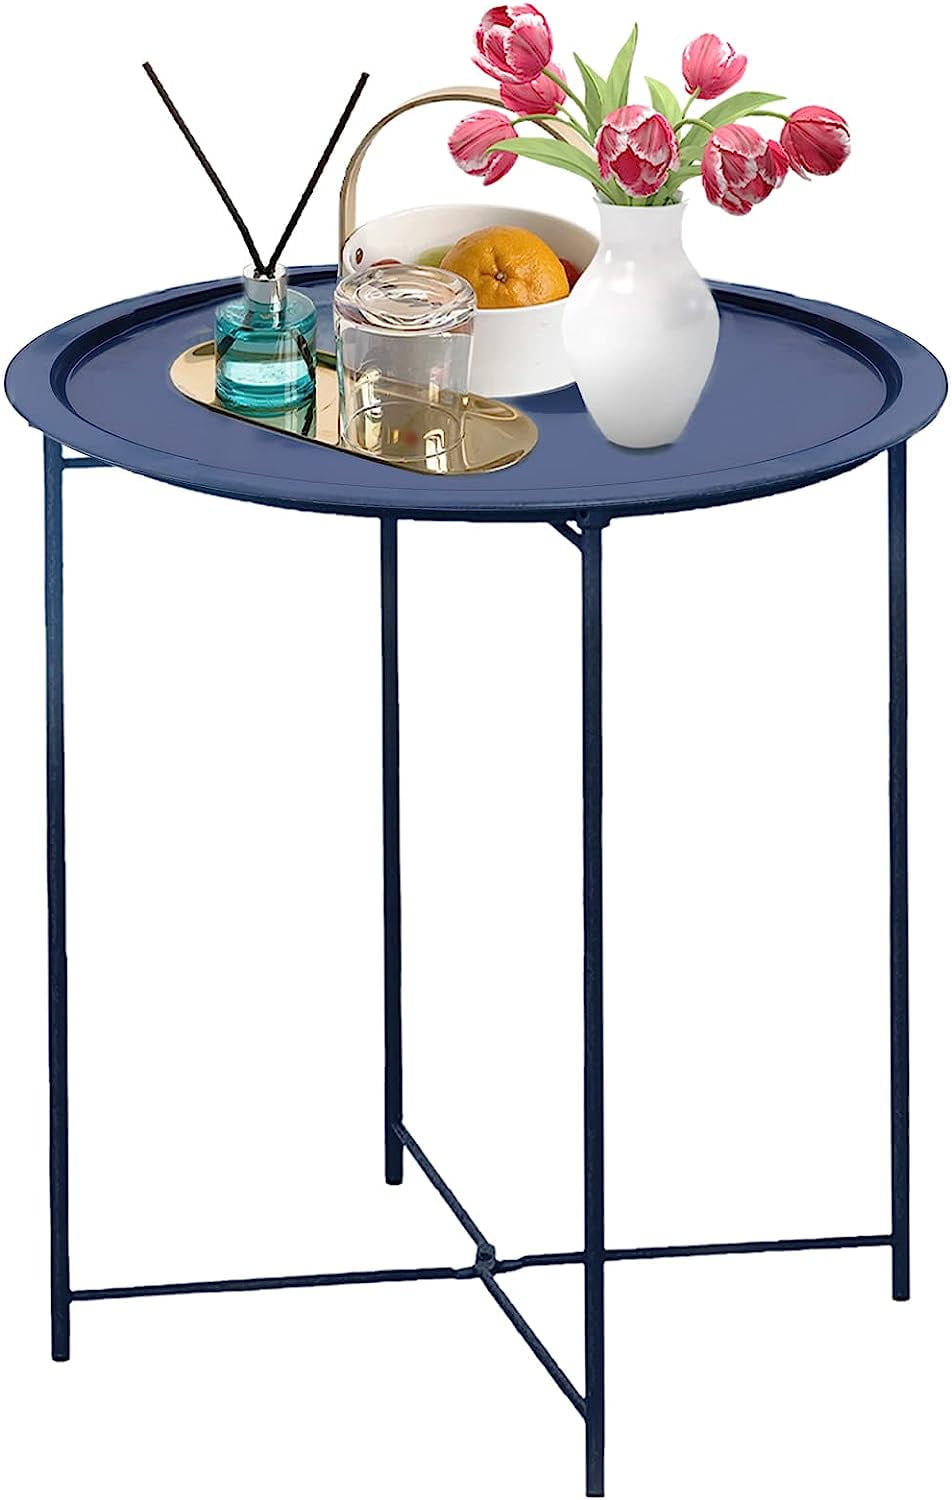 Garden 4 you Folding Tray Metal Side Table Blue Round End Table Cyan Sofa Small Accent Fold-able Table, Round End Table Tray, Next to Sofa Table, Snack Table for Living Room and Bed Room